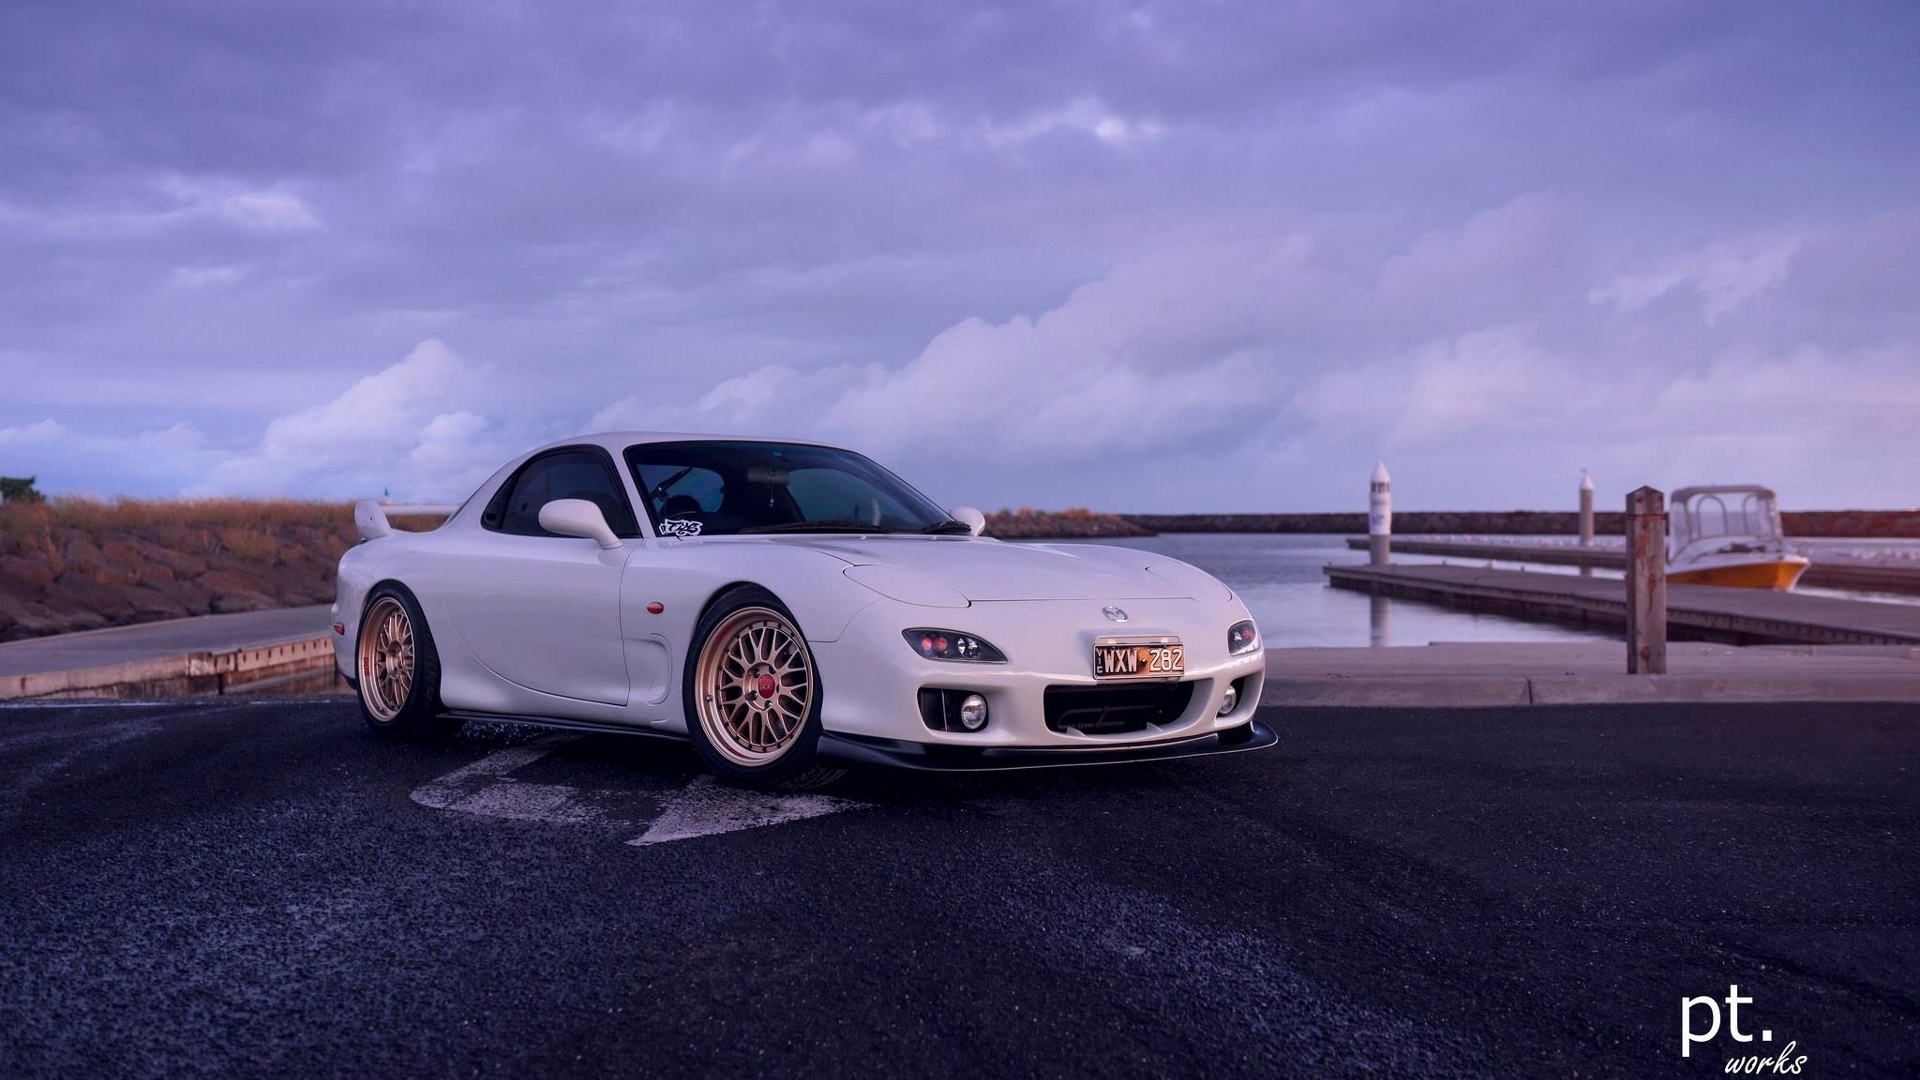 Wallpaper, Mazda RX 7 FD, Mazda RX Japanese cars, JDM, white cars, sky, clouds, water, boat, car, vehicle 1920x1080